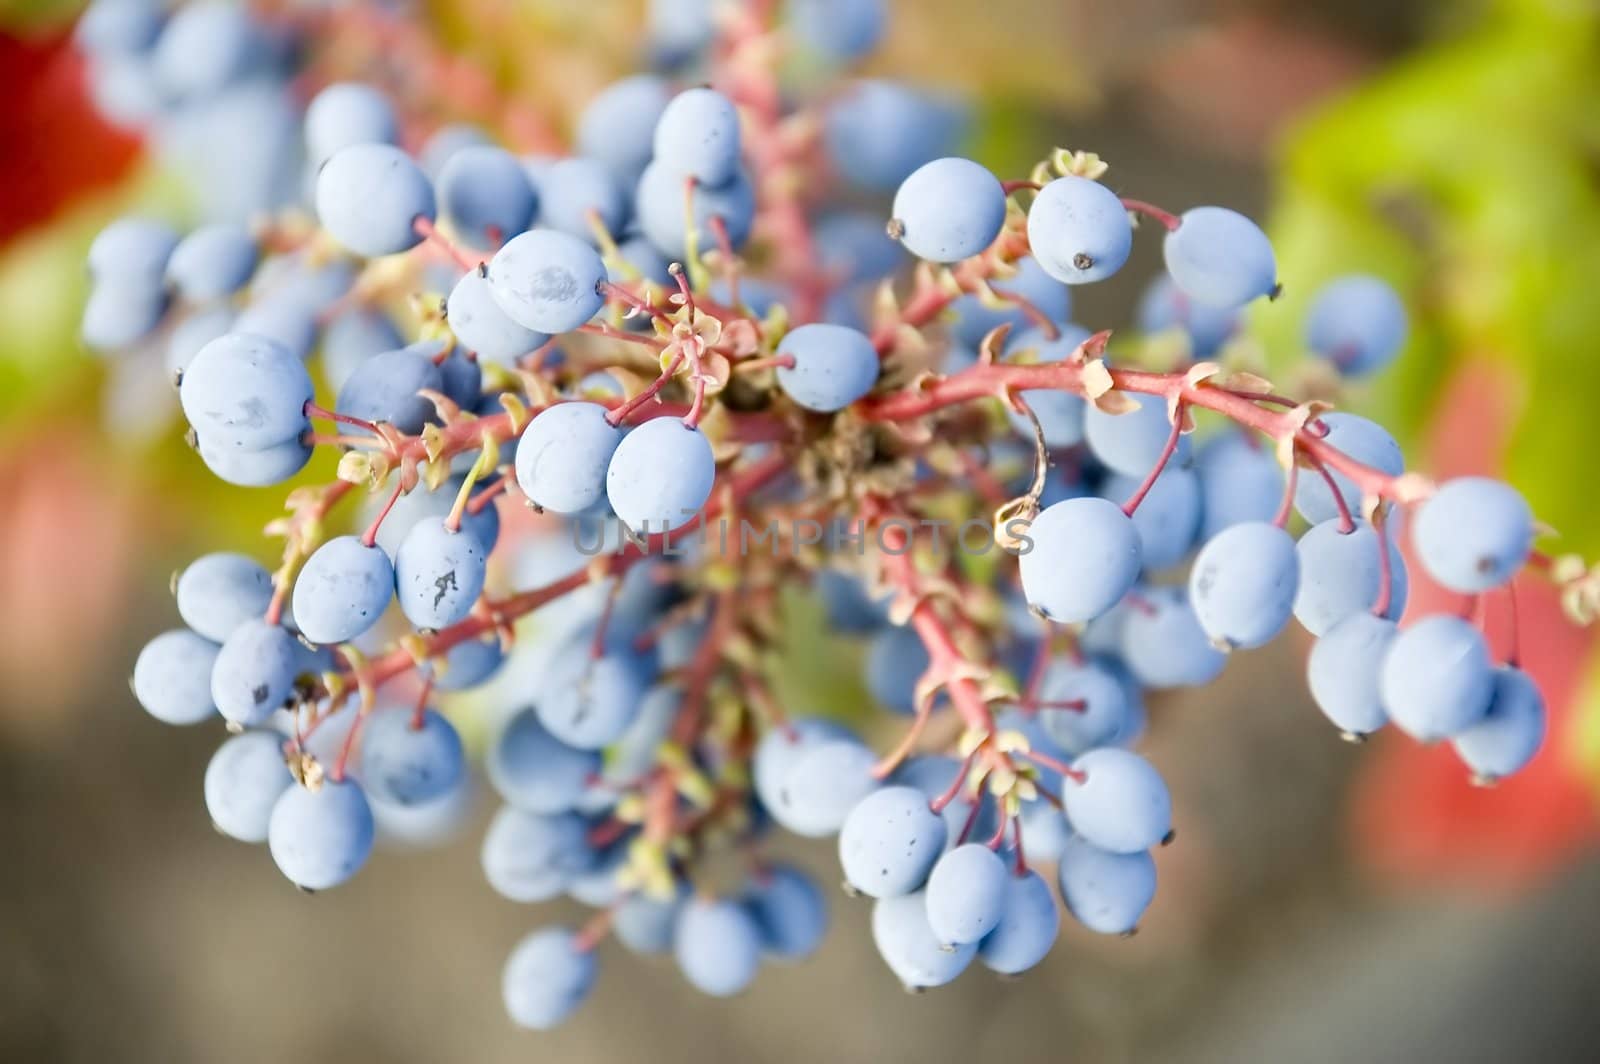 Blue berries on an ornamental plant with red stems and green leaves.